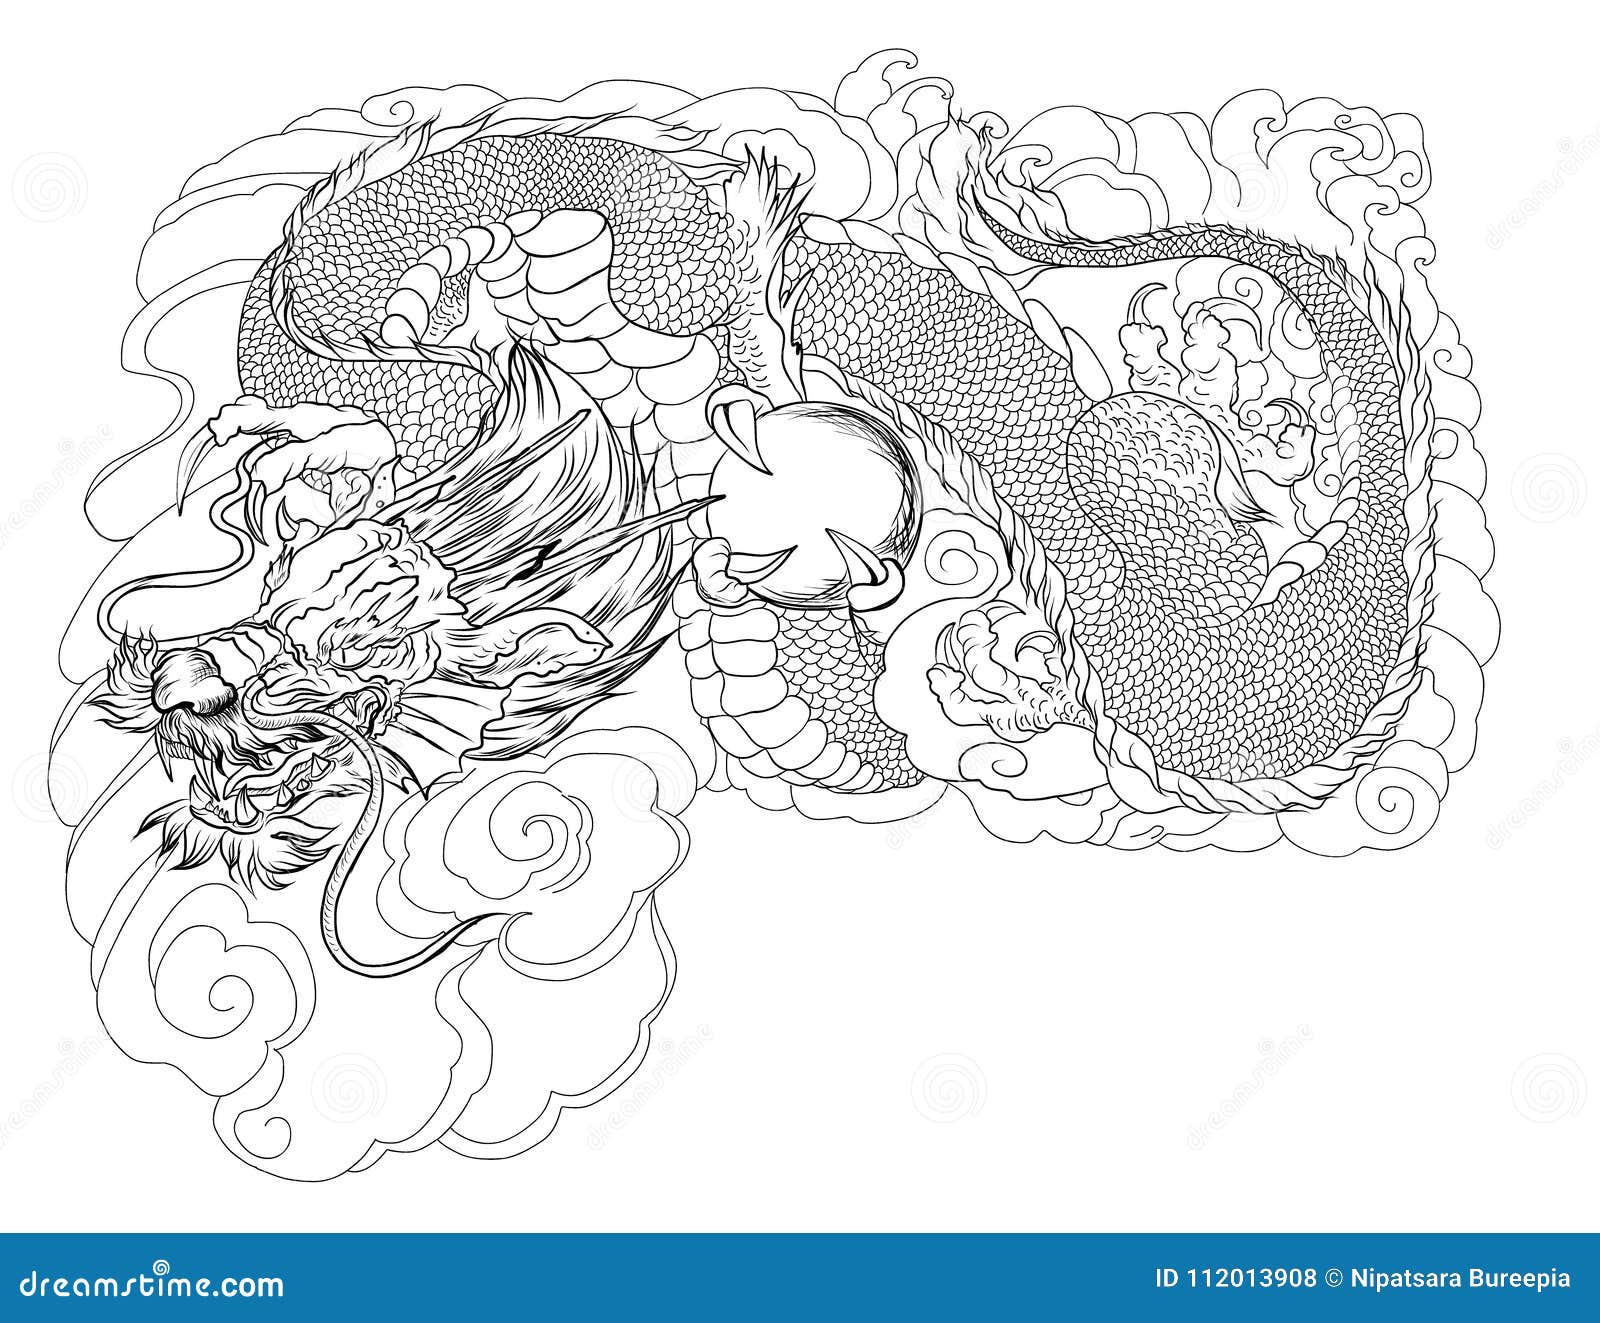 Tattoo Japanese Dragon Drawing Chinese Dragon  Transparent Dragon Tattoo  Png Png Download  vhv